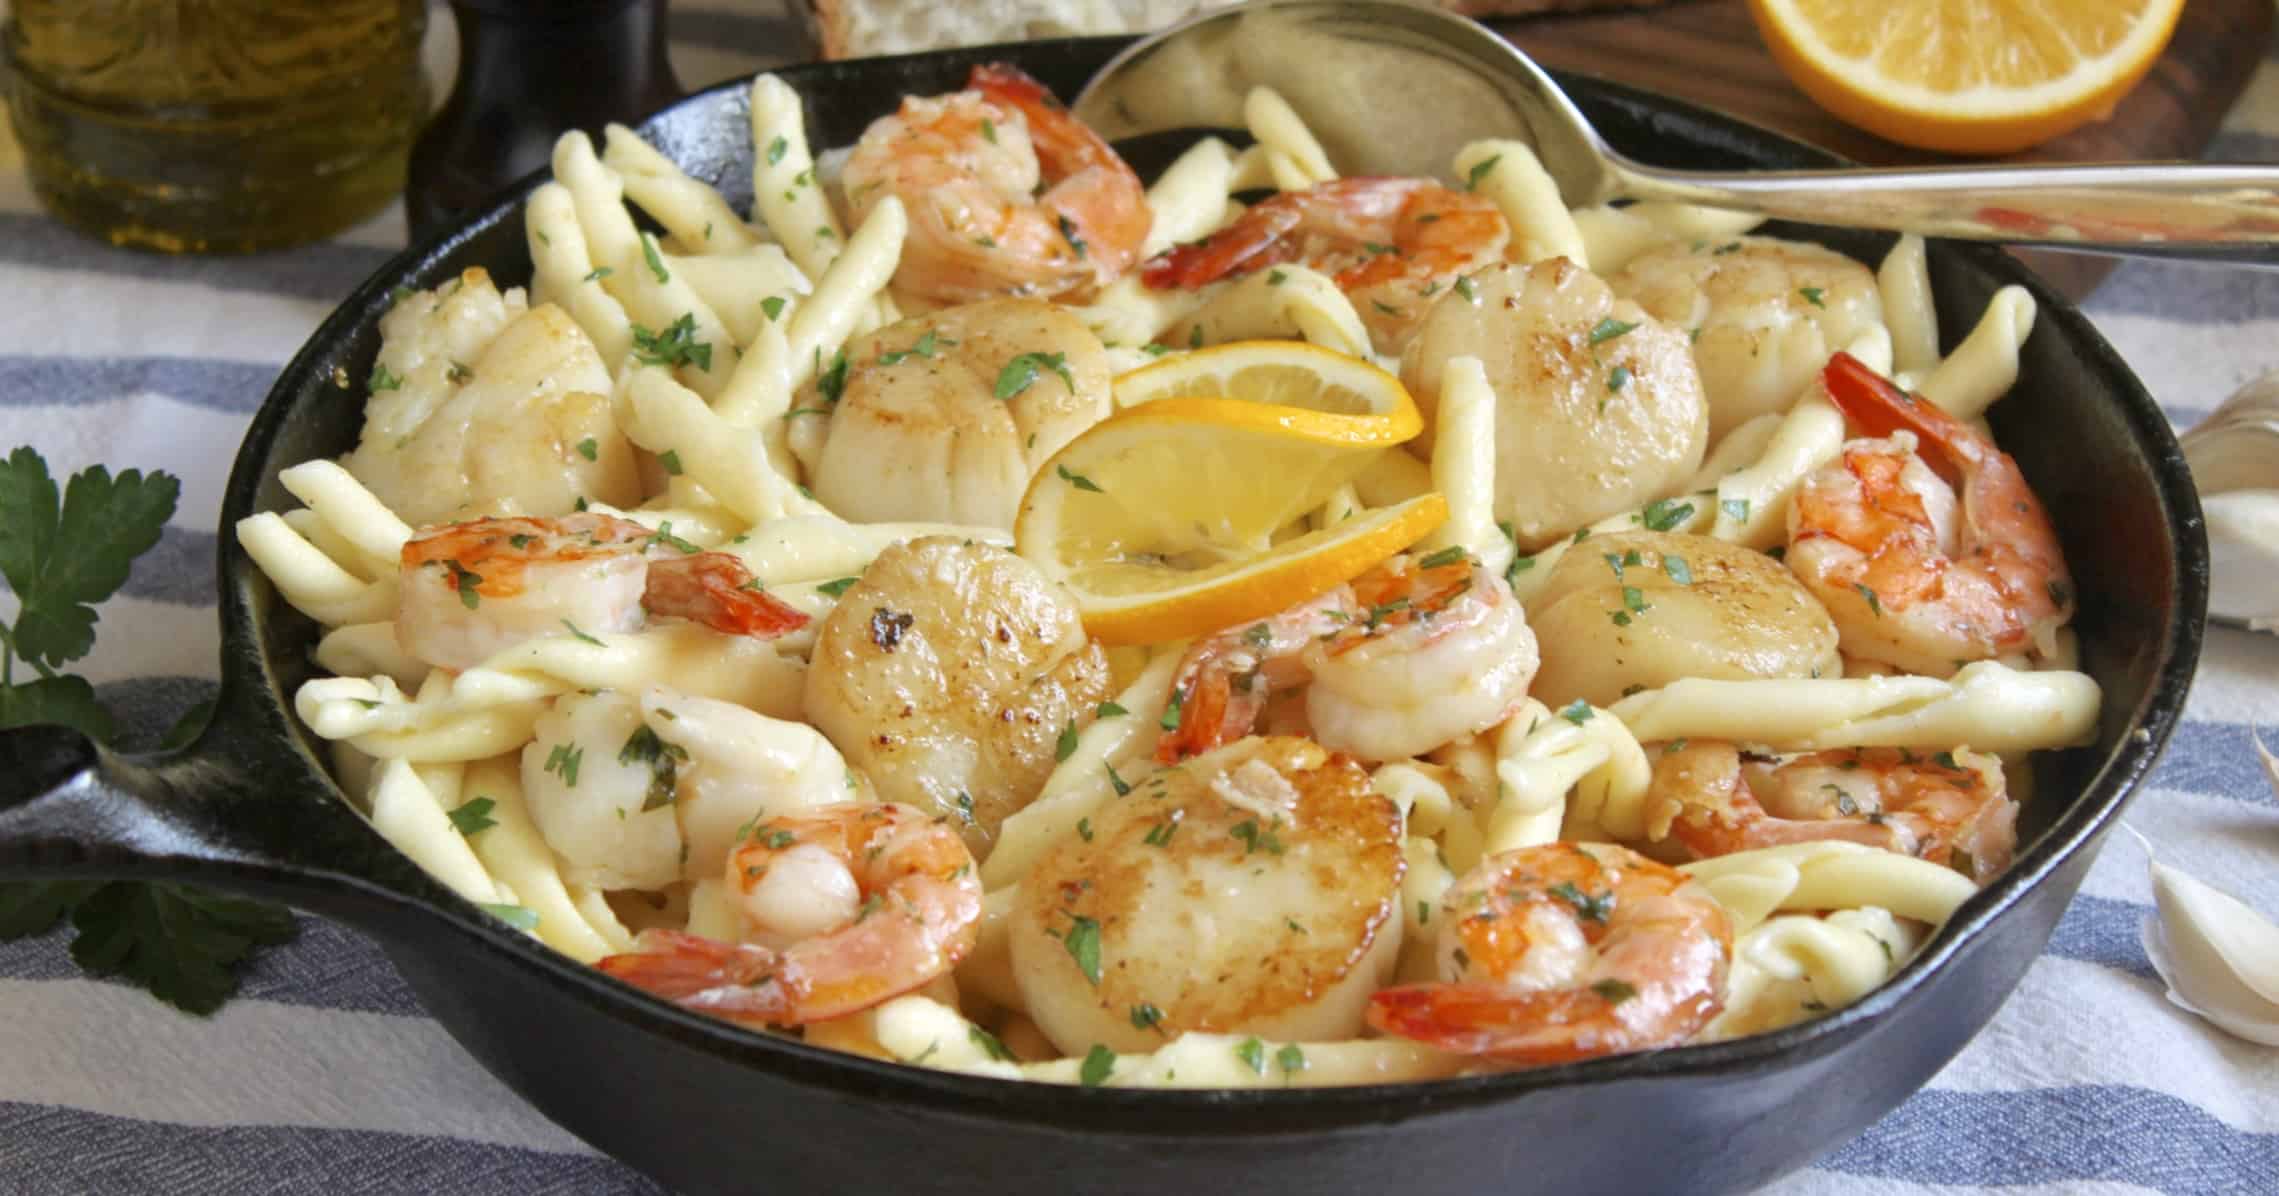 Seafood pasta with shrimp and scallops (and garlic)!